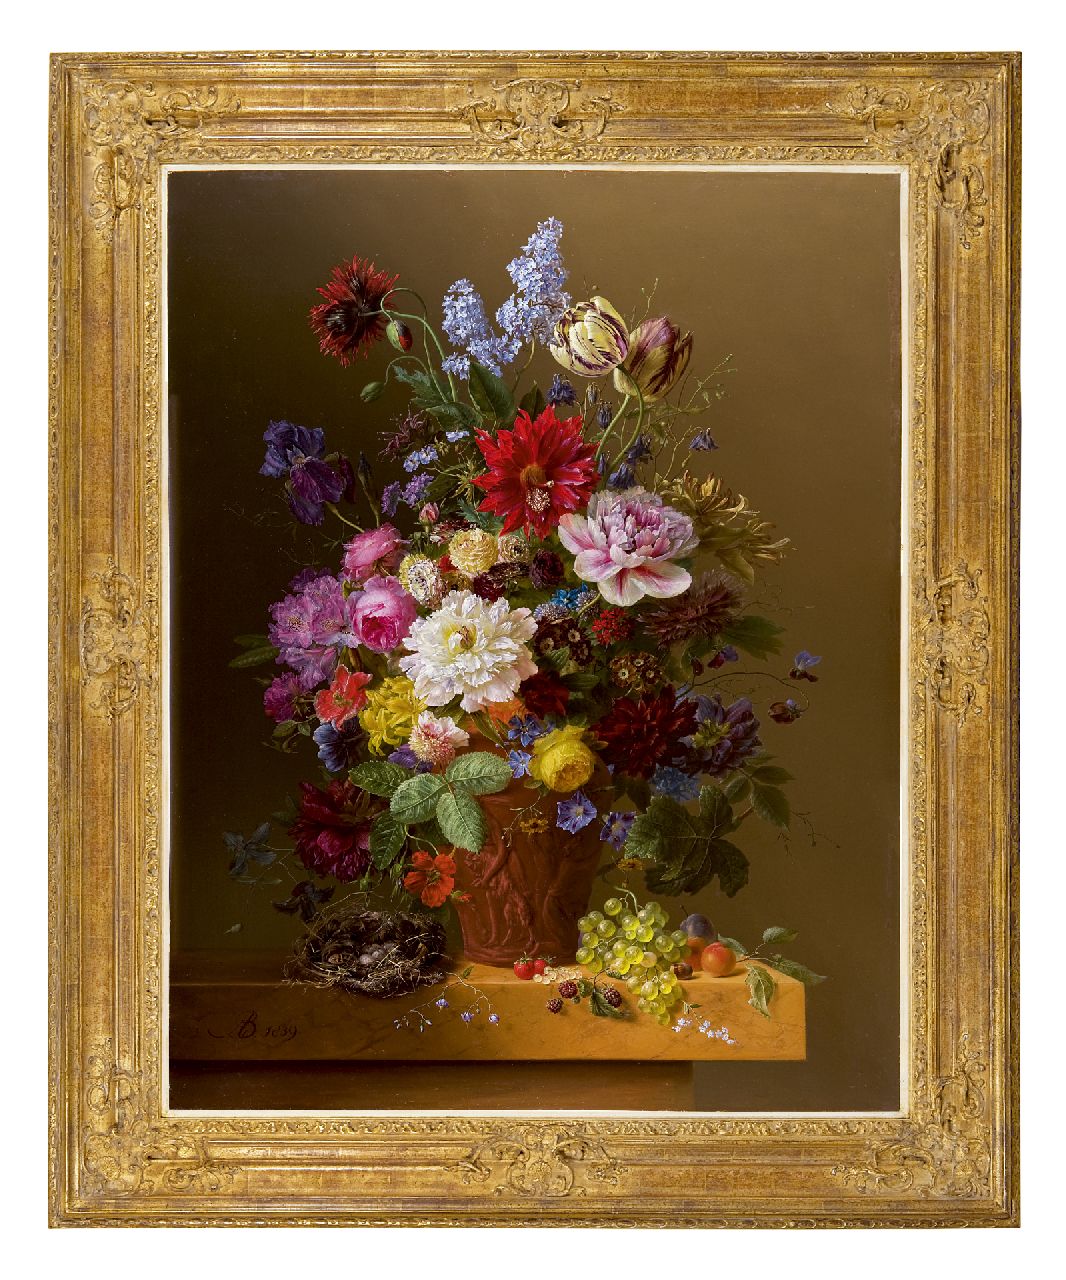 Bloemers A.  | Arnoldus Bloemers, Flowers in a terracotta vase on a marble ledge, oil on panel 104.2 x 81.4 cm, signed l.l. with monogram and dated 1839